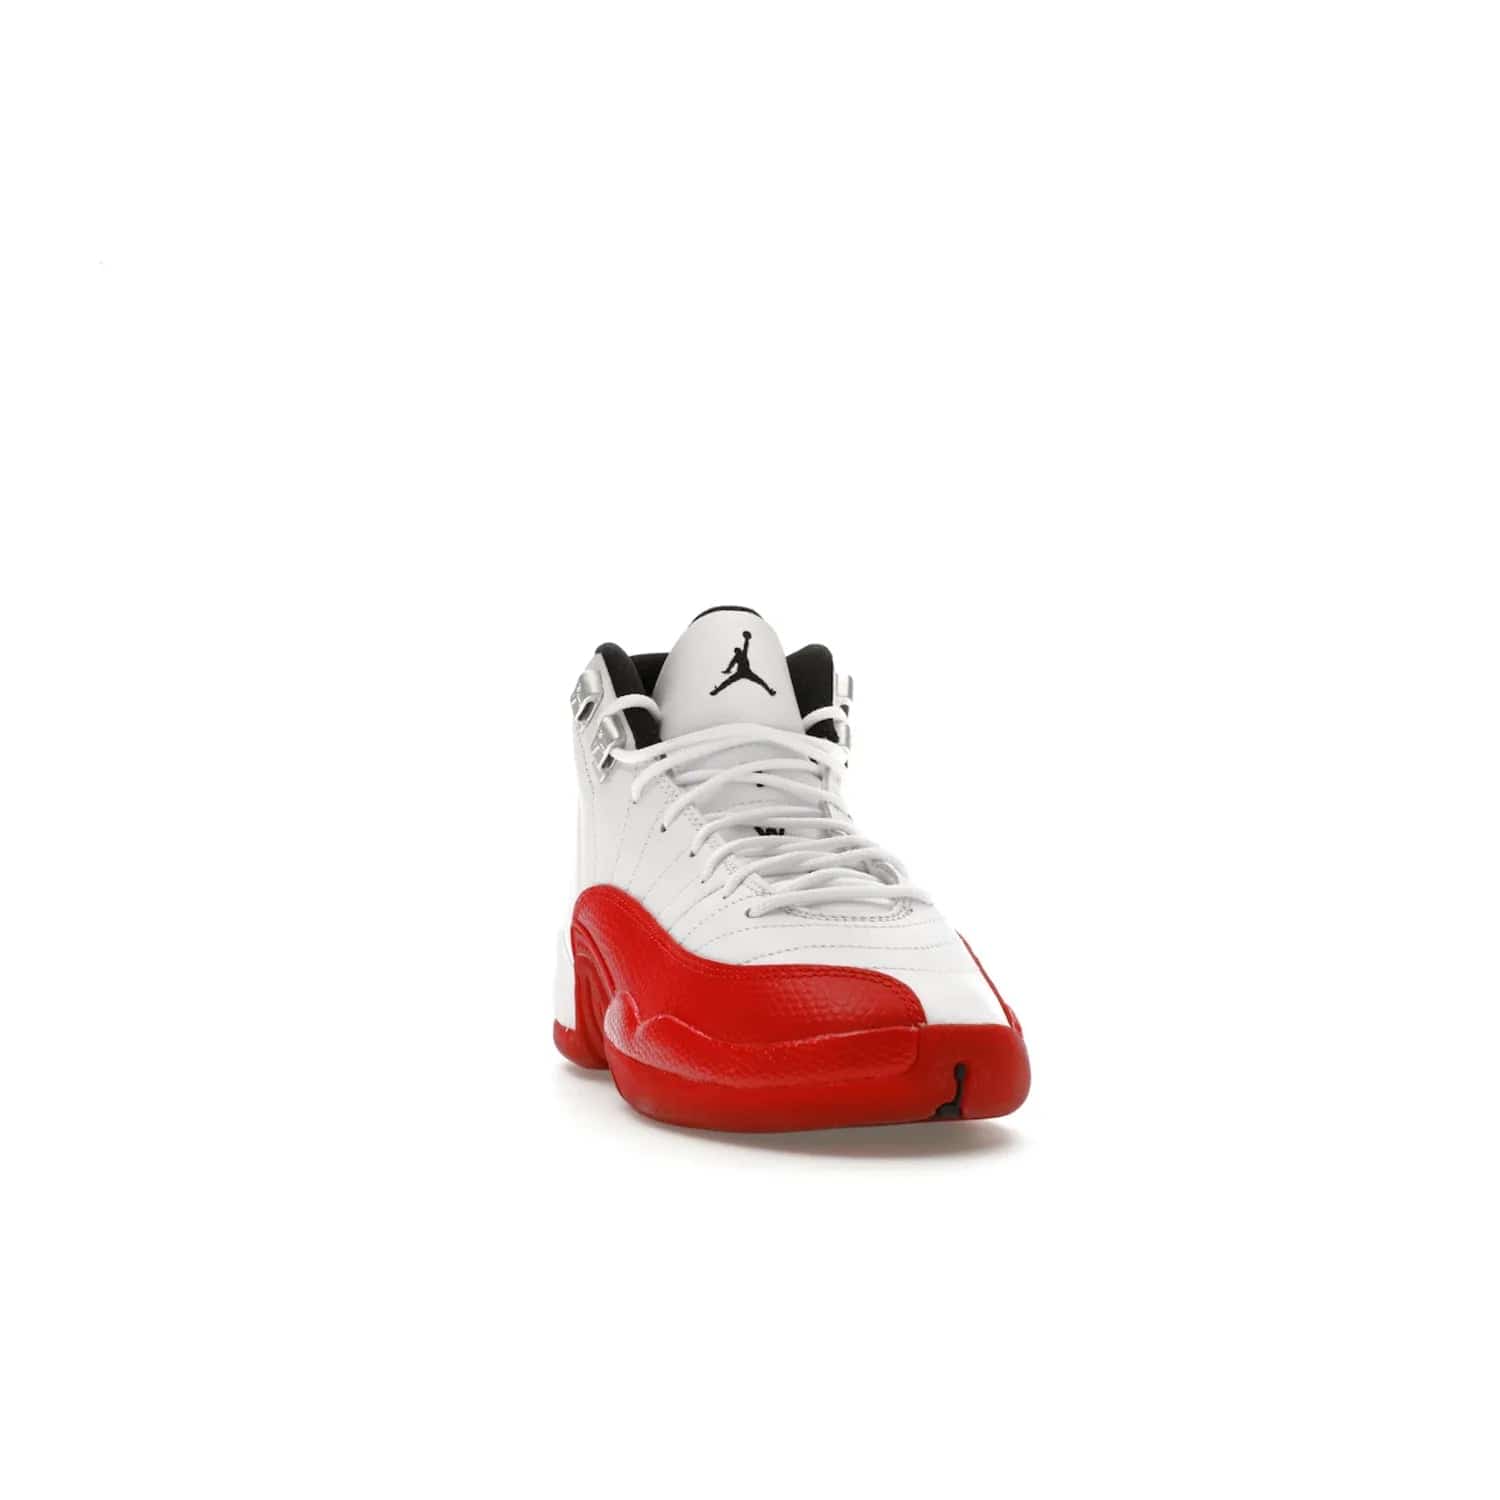 Jordan 12 Retro Cherry (2023) (GS) - Image 8 - Only at www.BallersClubKickz.com - Grab the Jordan 12 Retro Cherry (2023) (GS) and show off your signature style with these iconic kicks. Dressed in White, Black and Varsity Red, these timeless kicks are sure to turn heads. Available October 28, 2023.